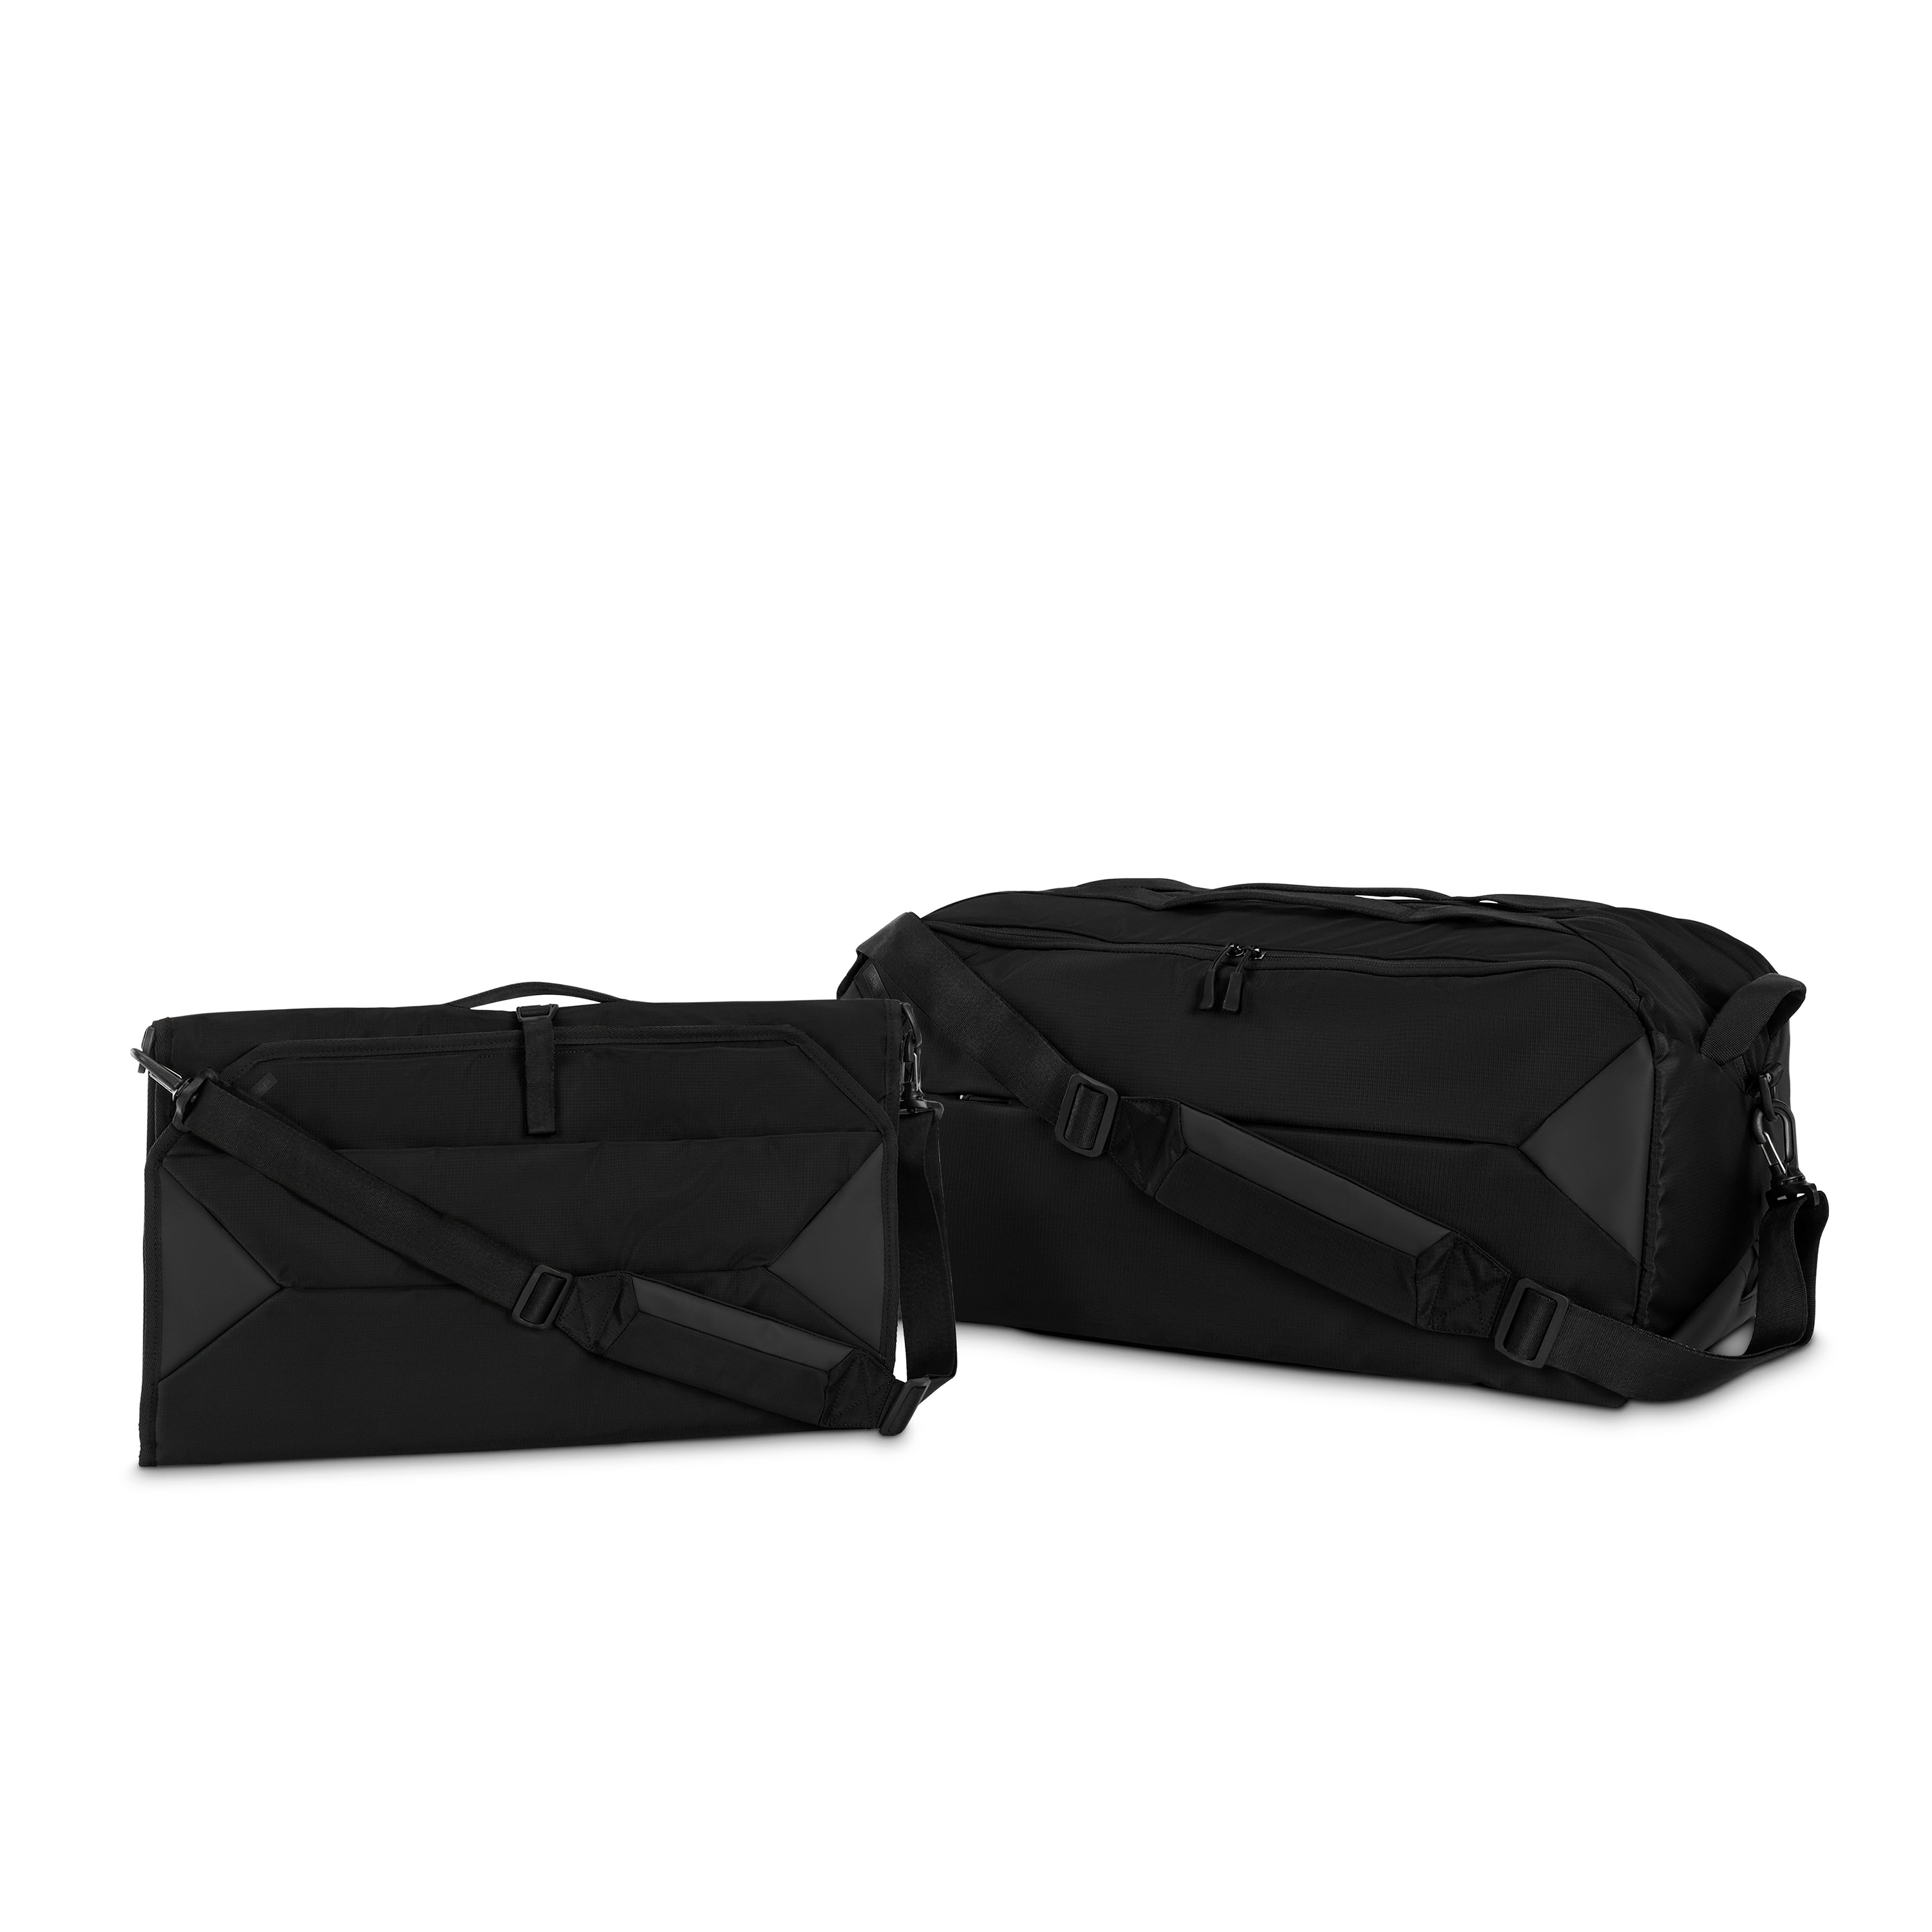 Ruin Interesting equality Buy CTS 2 in 1 Convertible Duffel for USD 107.99 | eBags